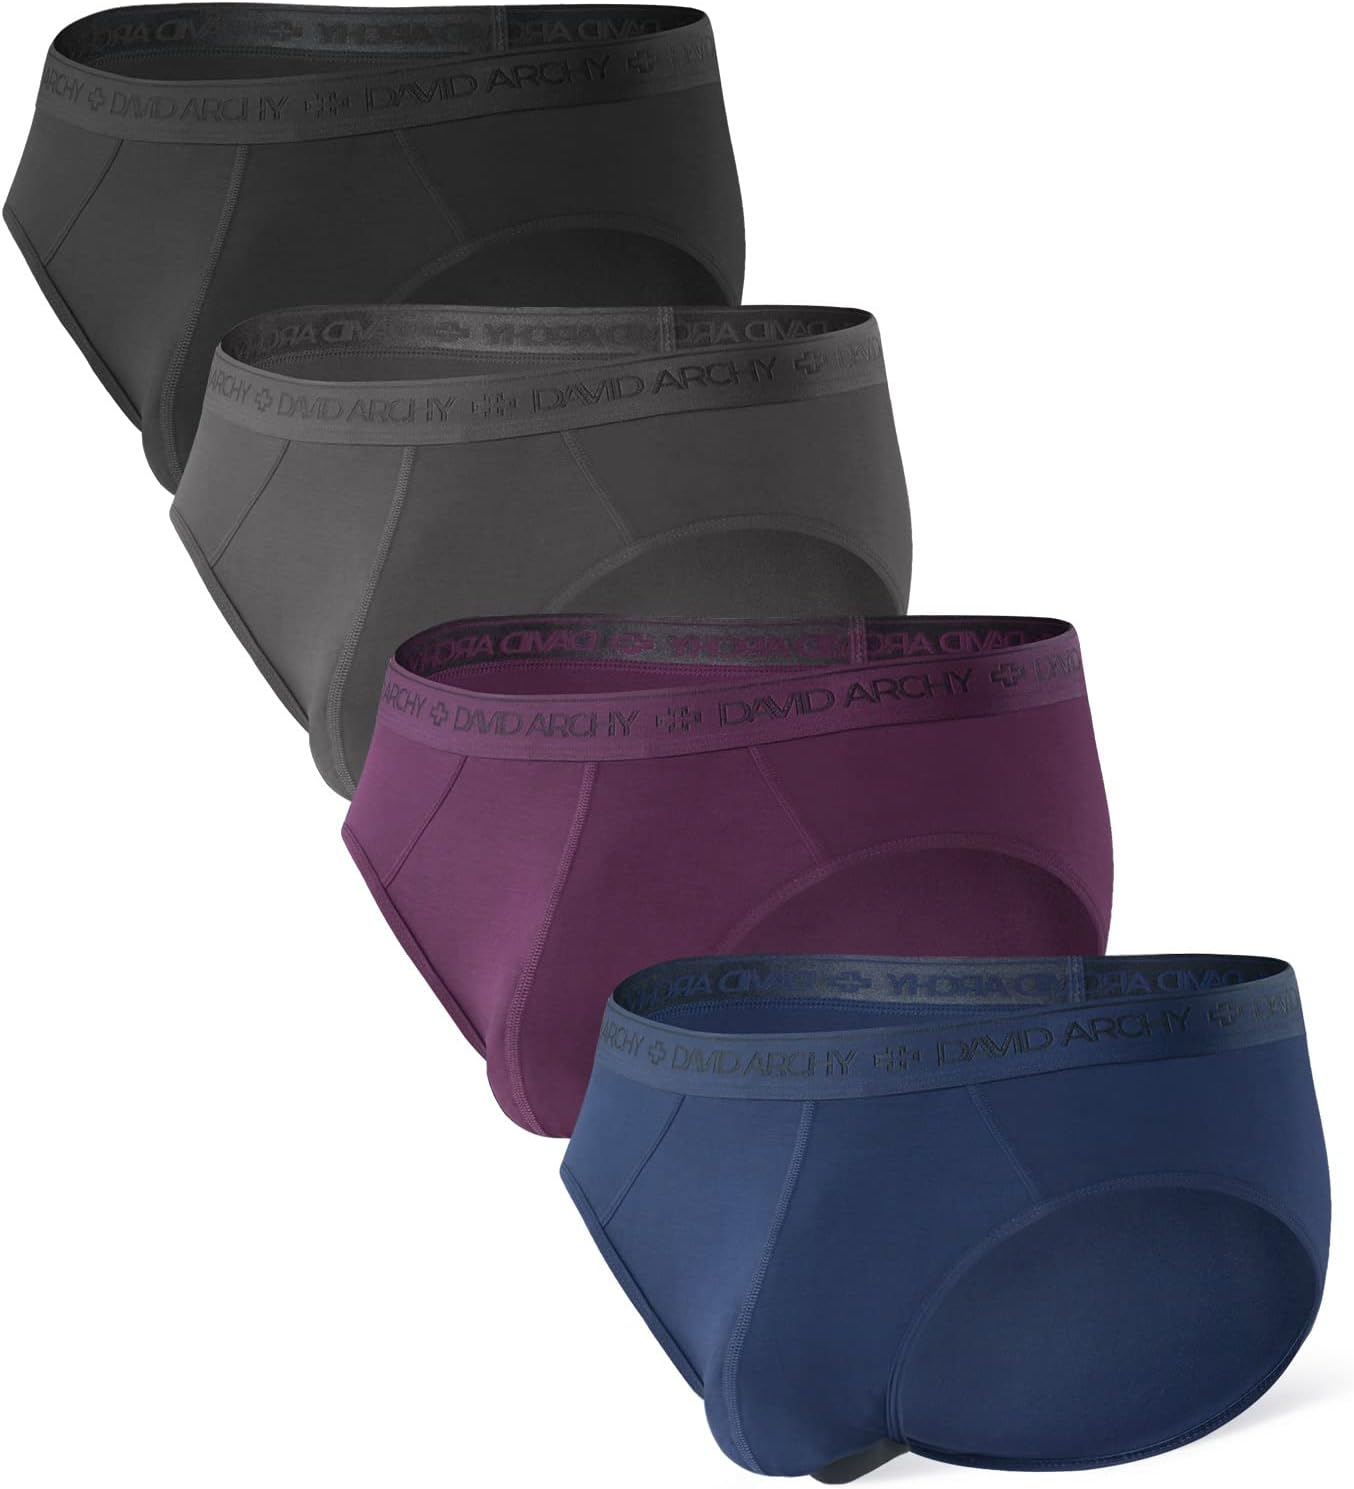 DAVID ARCHY Men's 4 Pack Micro Modal Separate Dual Pouch Briefs